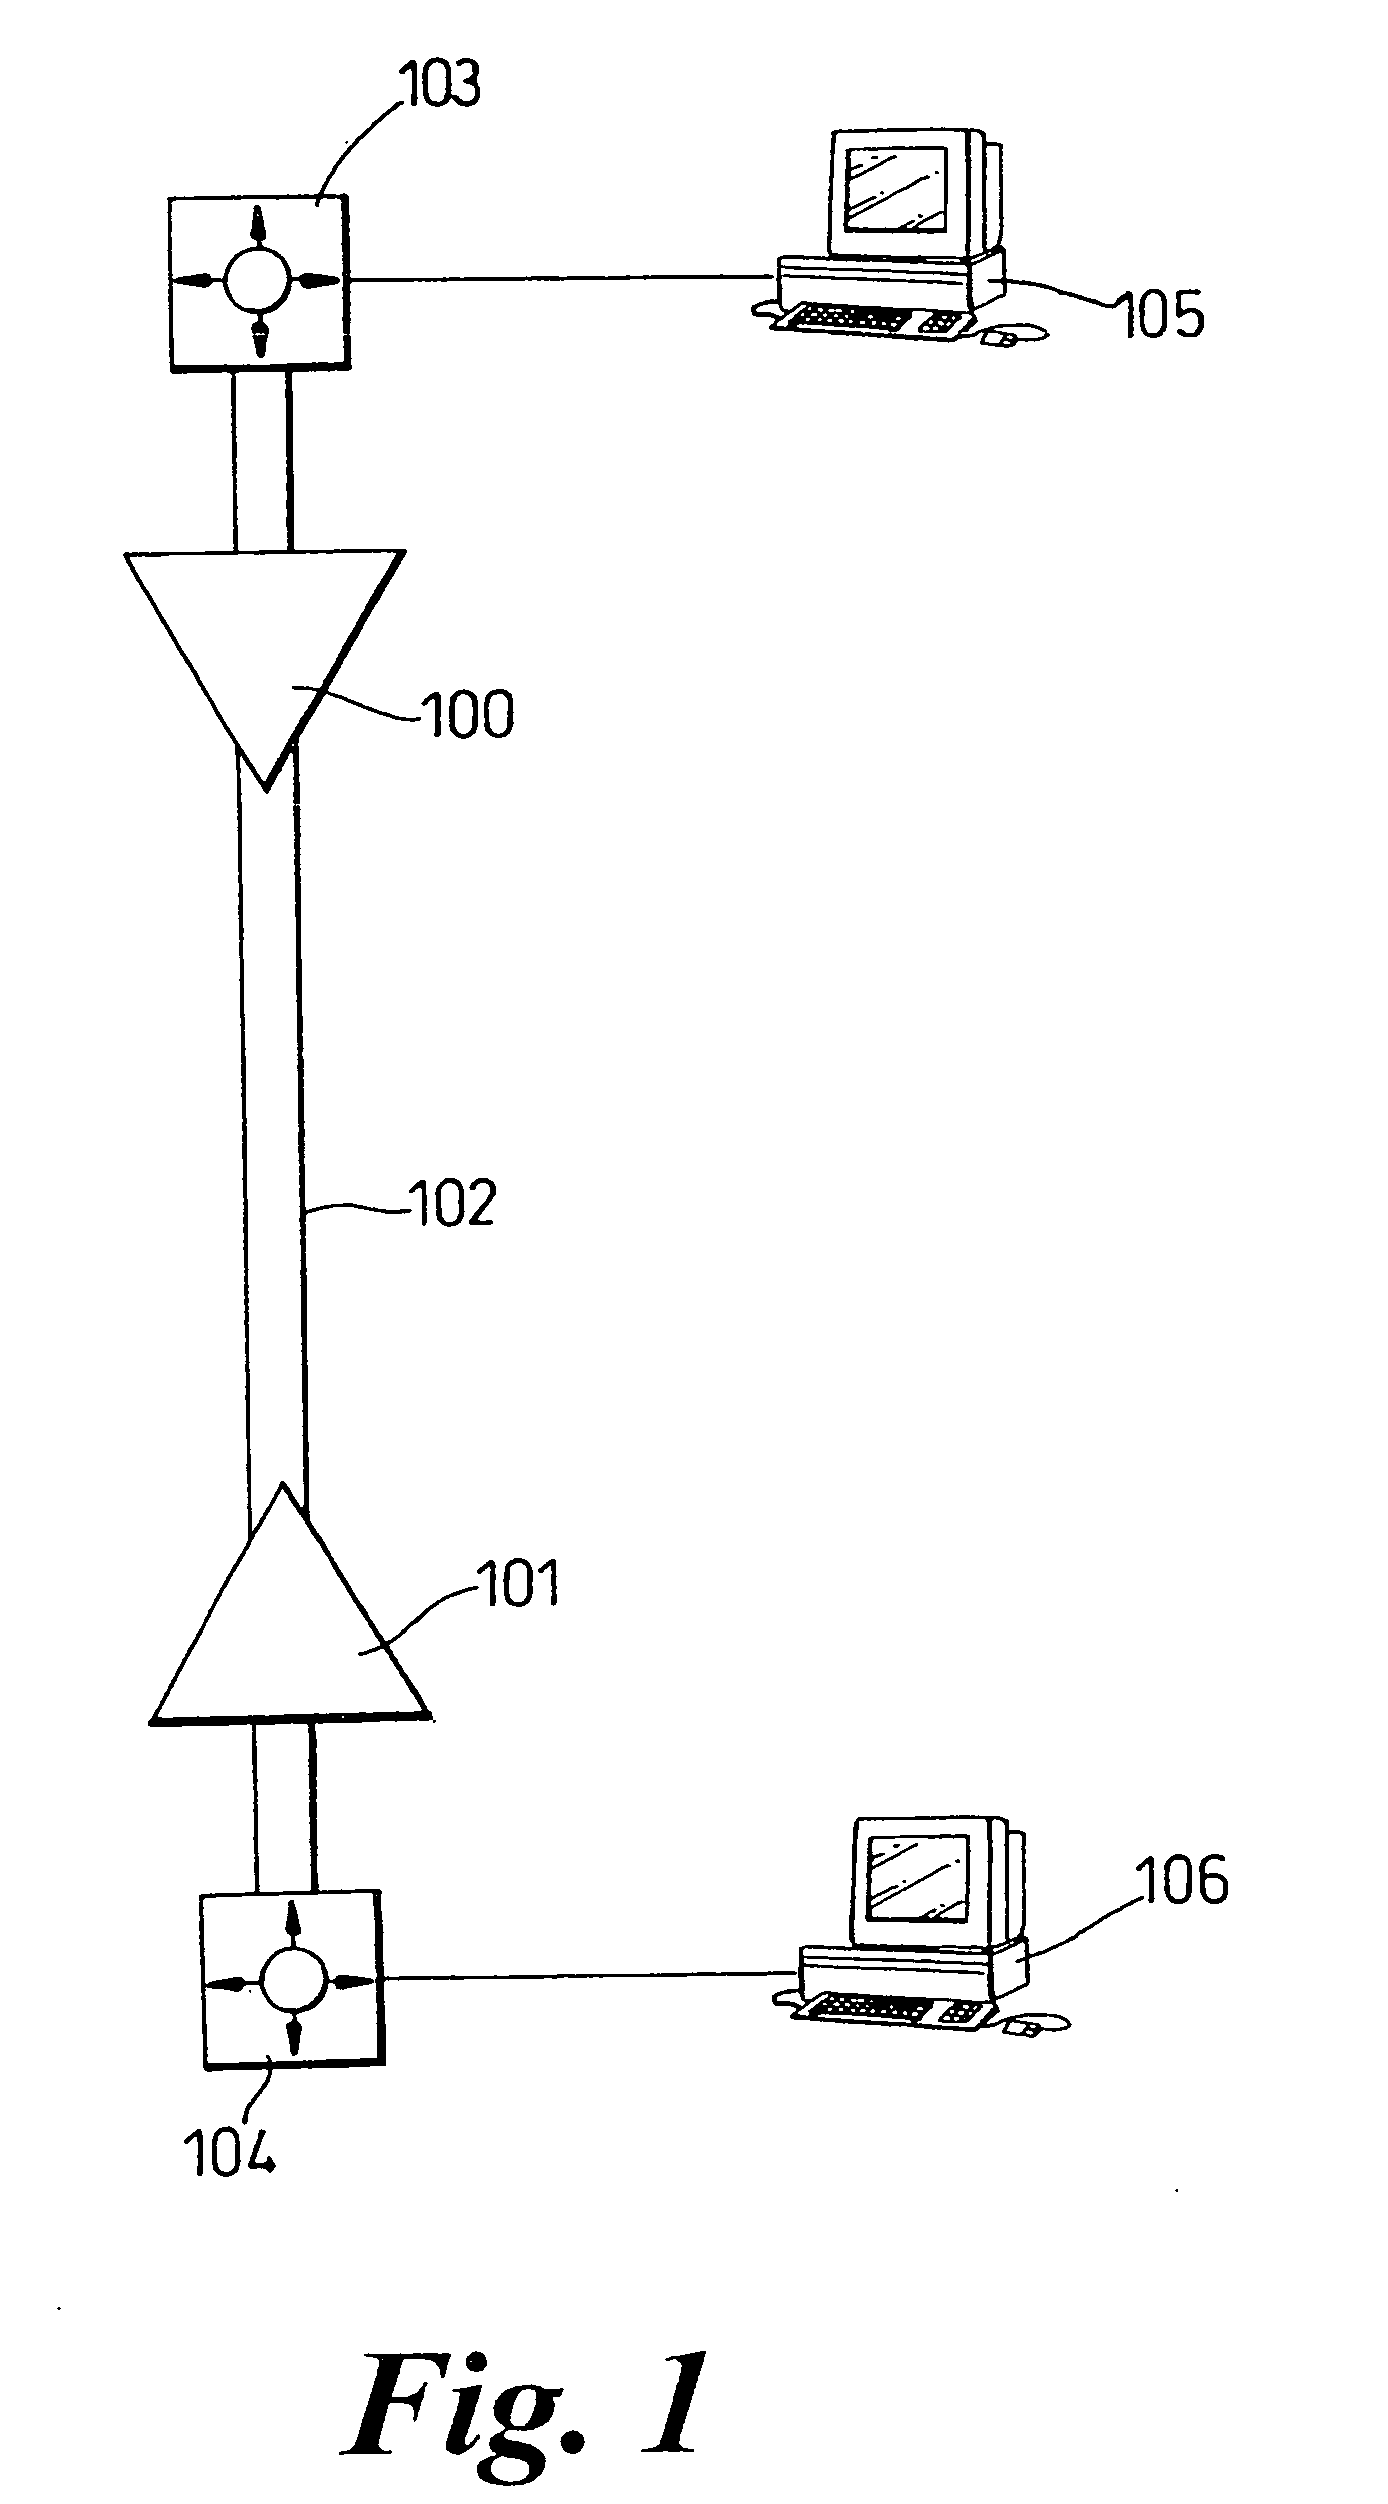 Frame based data transmission over synchronous digital hierarchy network